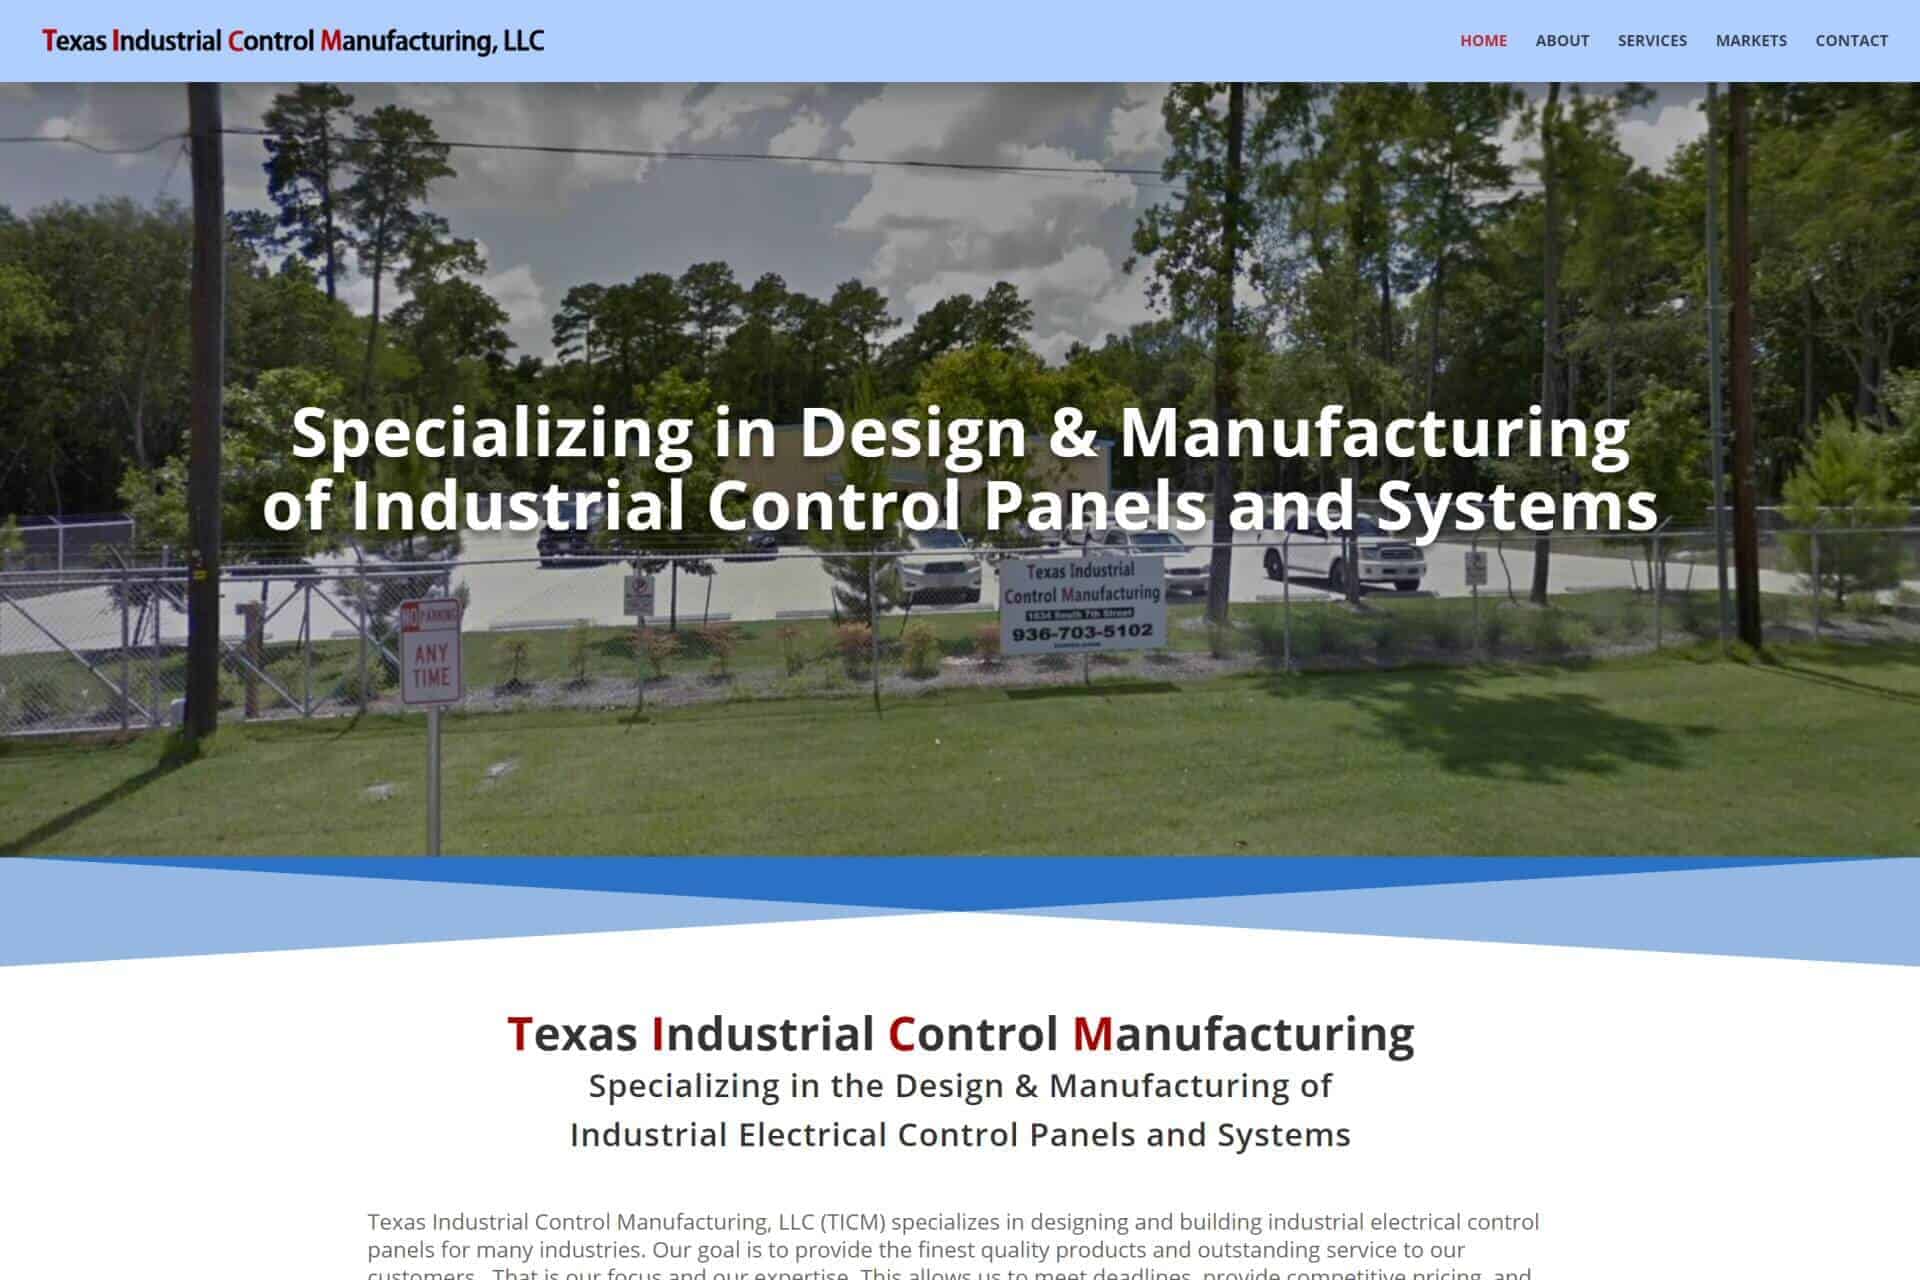 Texas Industrial Control Manufacturing Industrial Electrical Control Panels - Website Links for Marquise Pools #1 Best Pool Builder